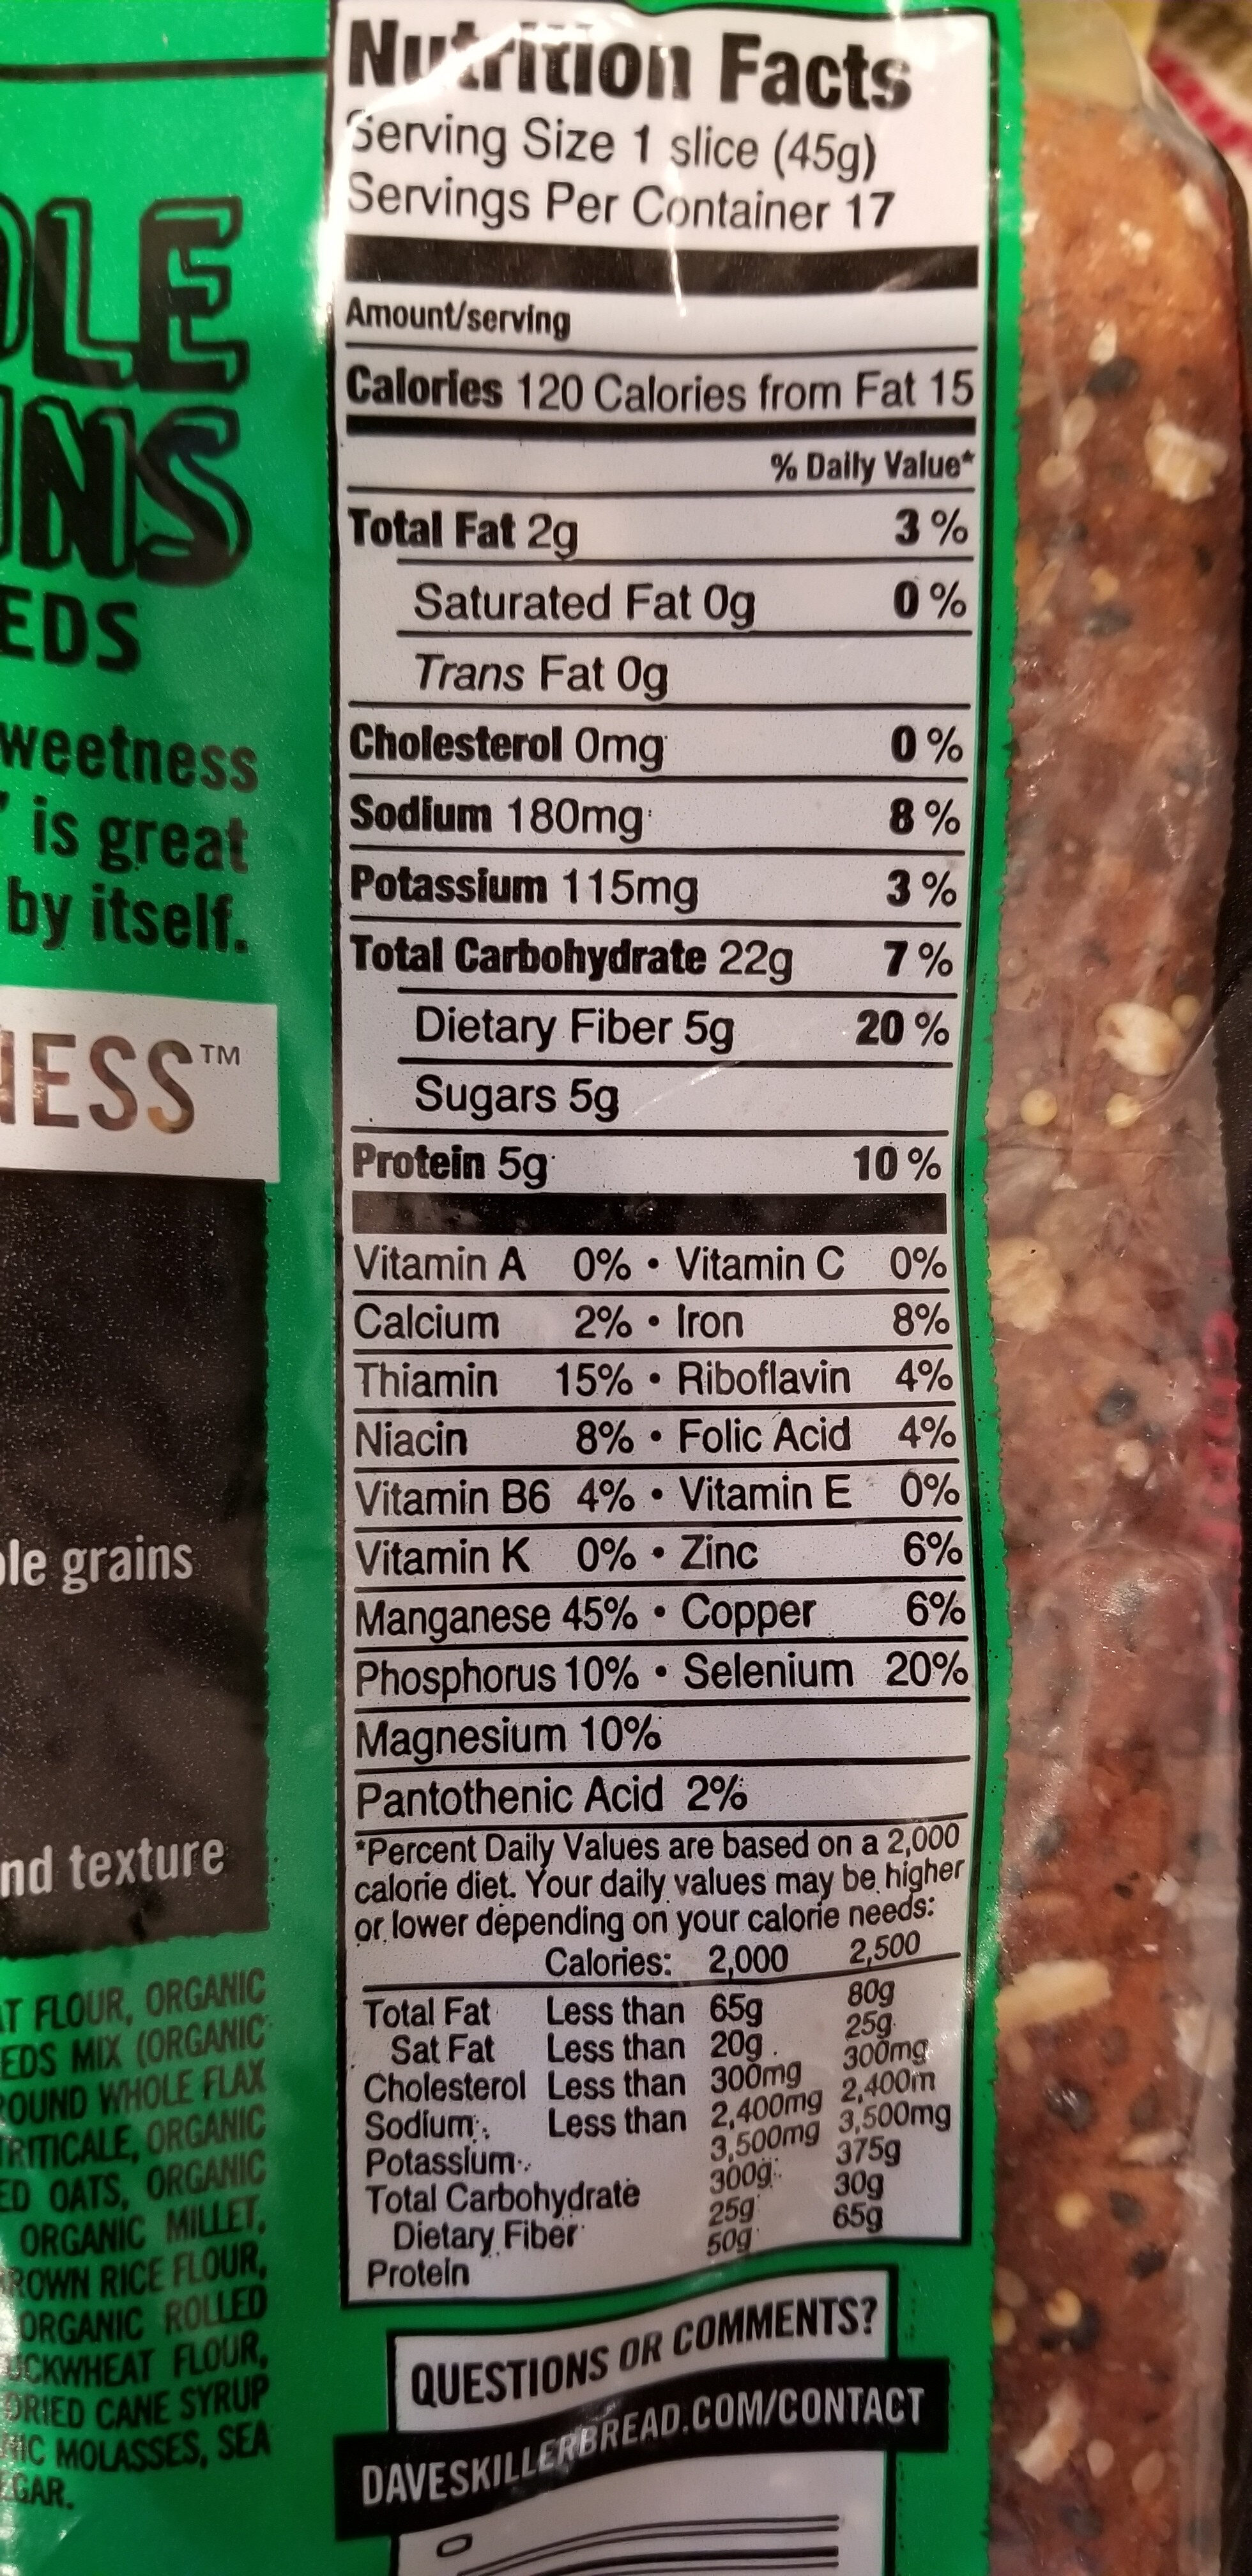 Dave's killer bread, organic whole grain and seeds bread - Nutrition facts